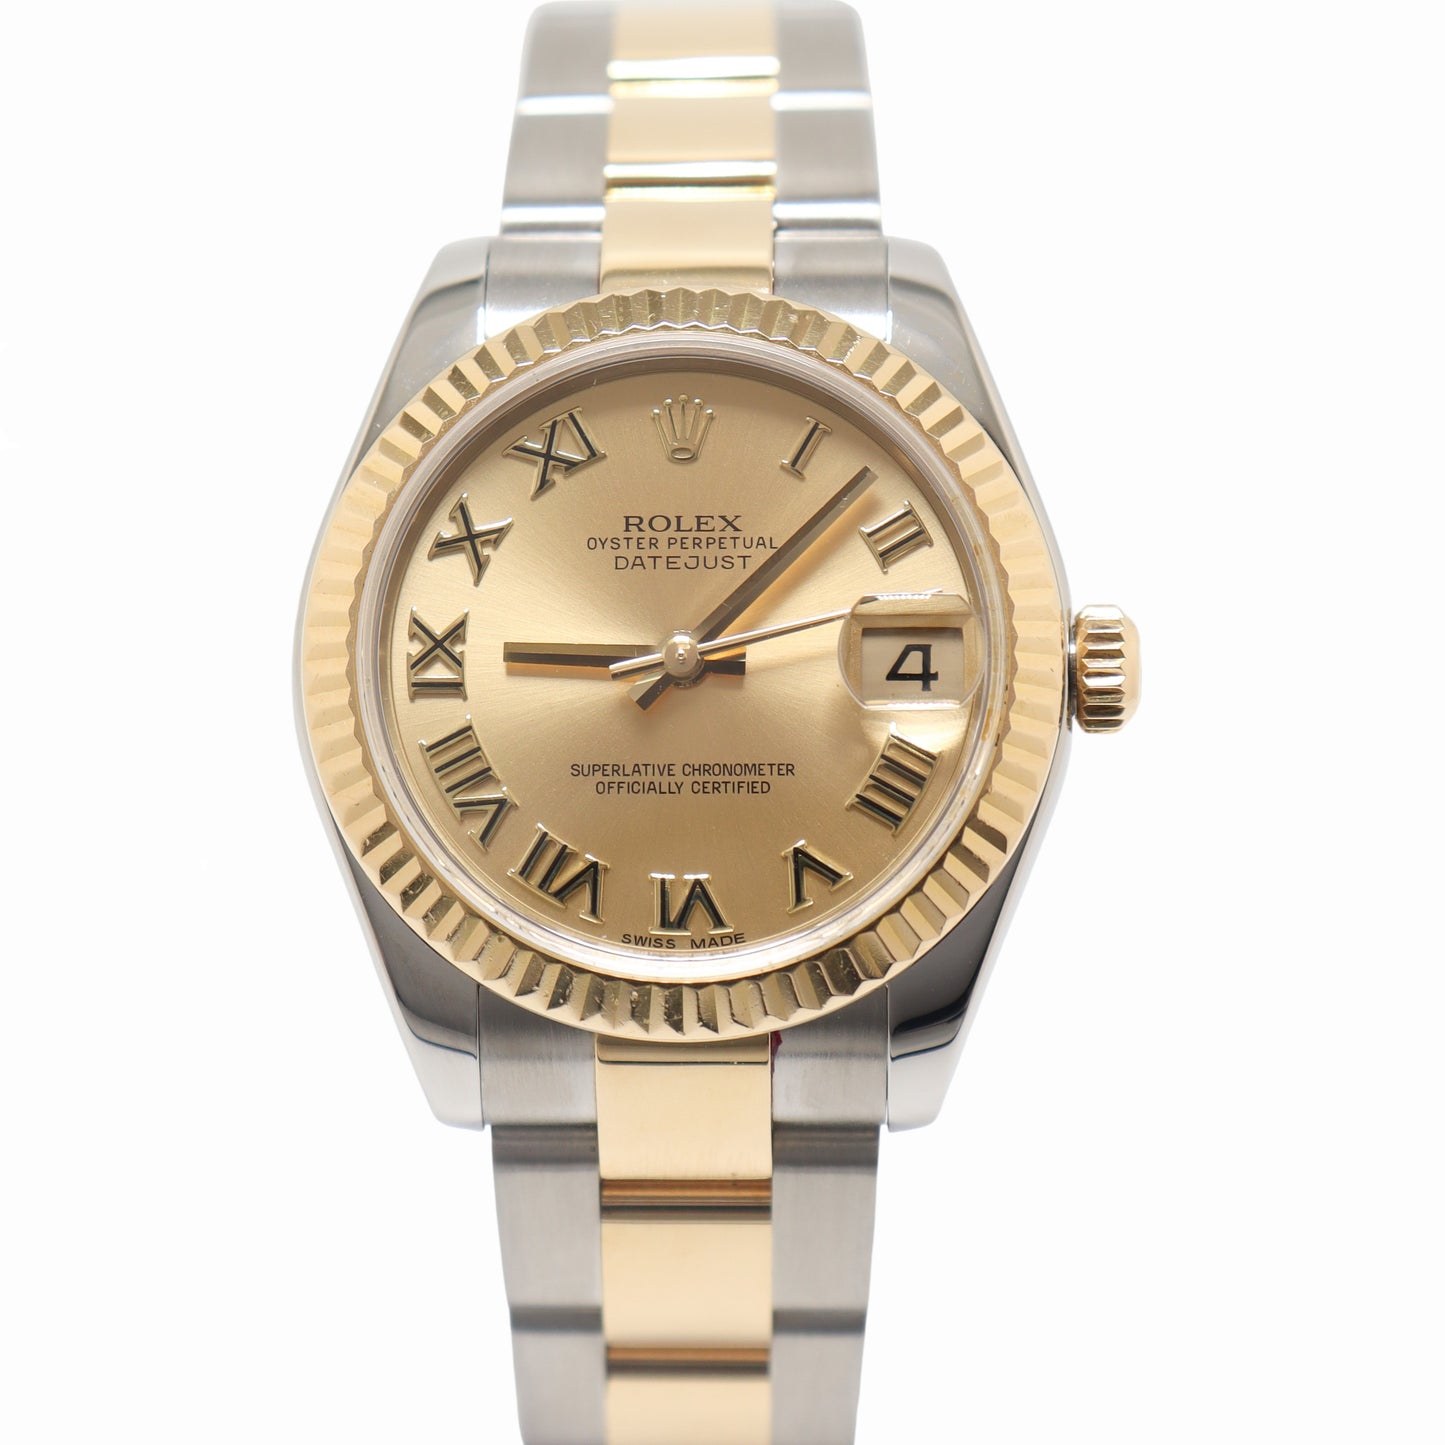 Rolex Datejust 31mm Yellow Gold & Stainless Steel Champagne Roman Dial Watch Reference# 178273 - Happy Jewelers Fine Jewelry Lifetime Warranty